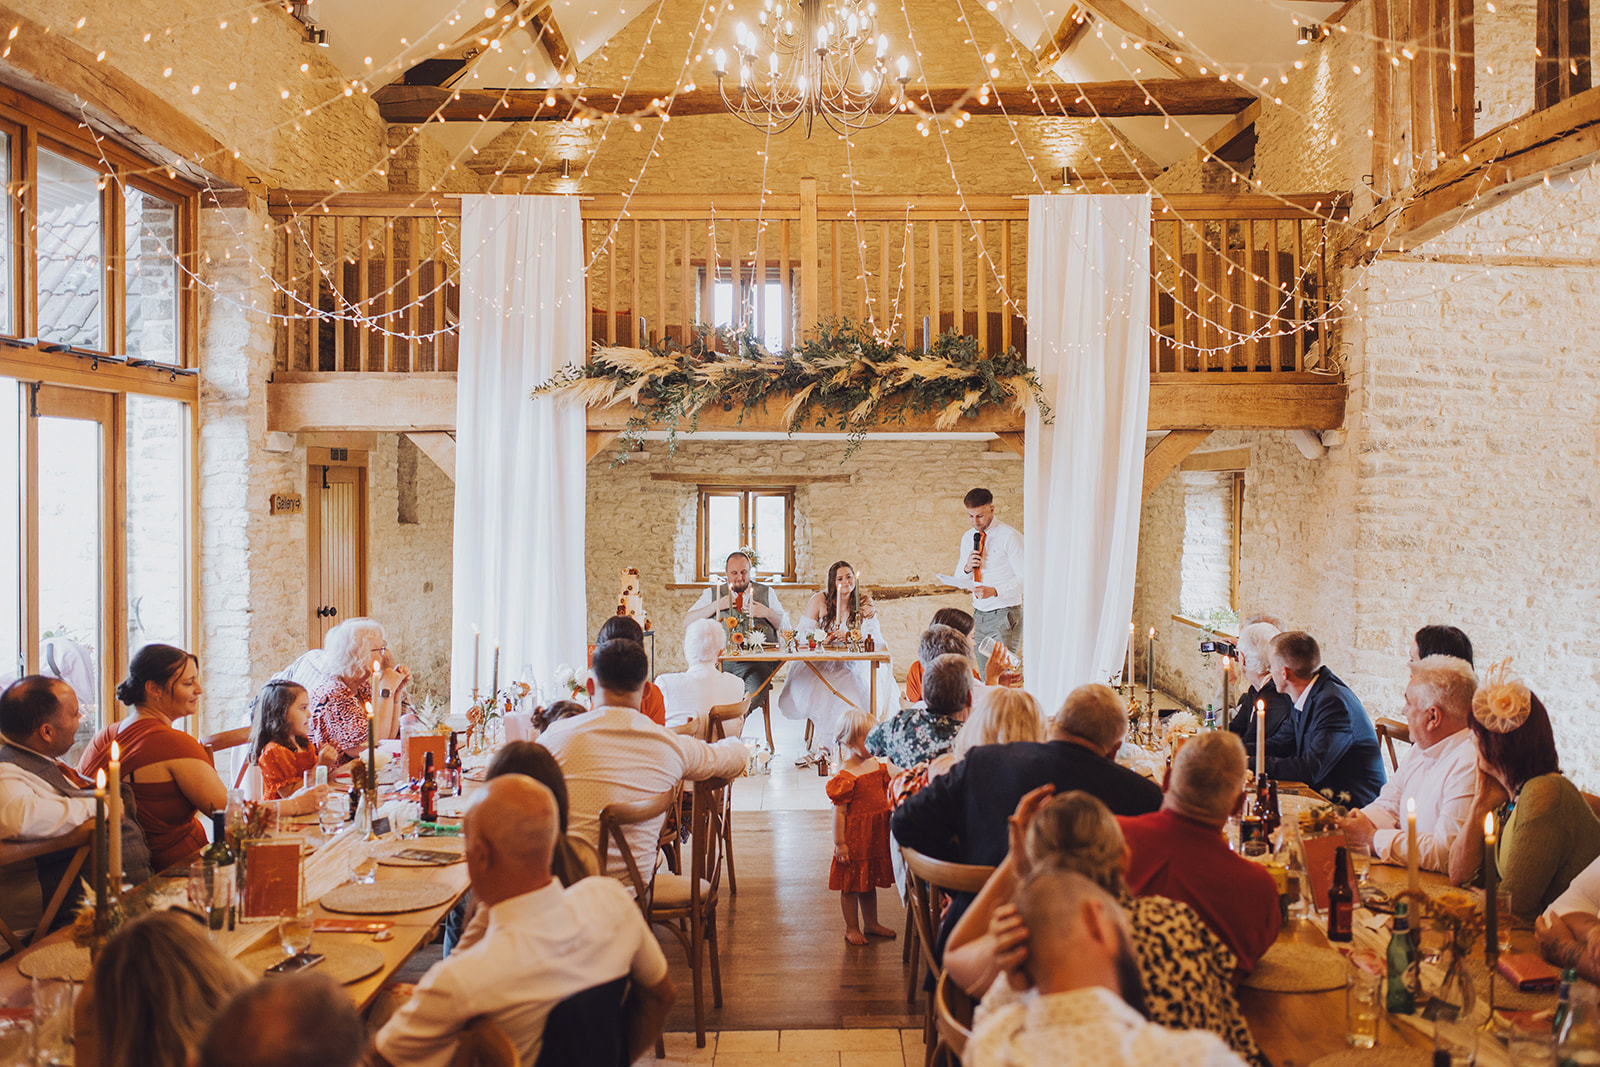 Autumn inspired wedding in August at Kingscote Barn